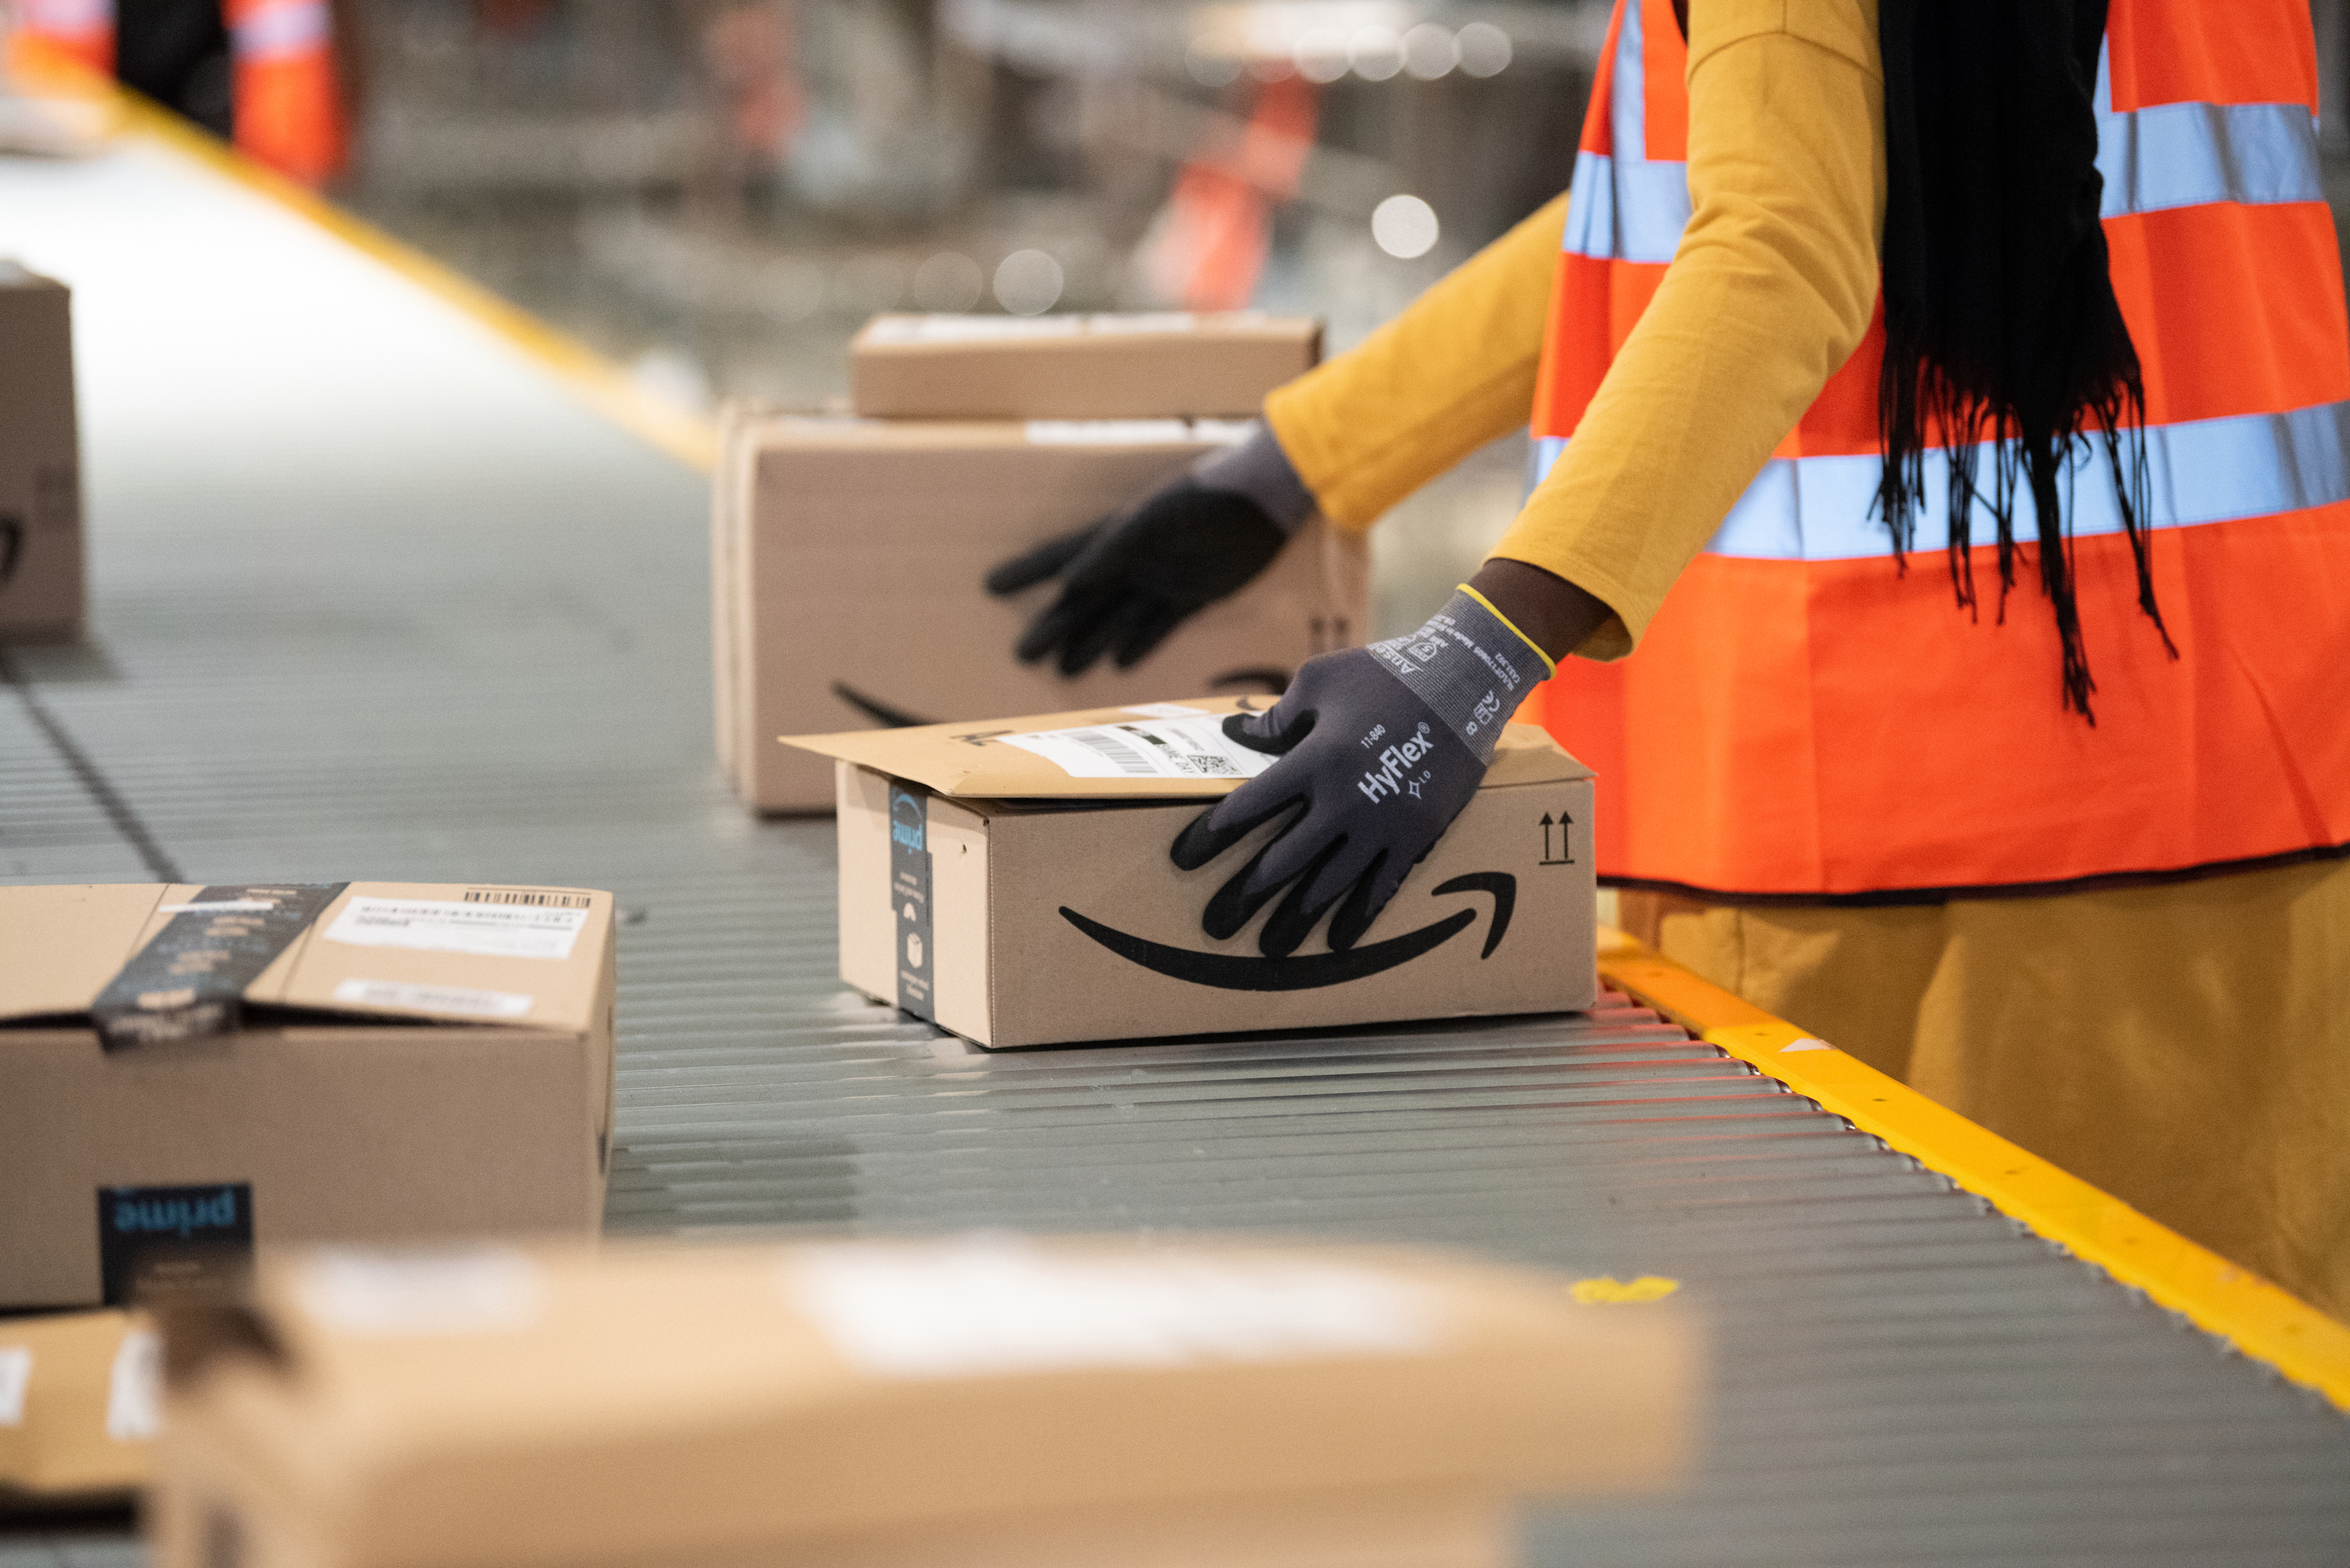 Federal safety investigators said they won't issue citations against Amazon related to the deaths of two workers at separate New Jersey sites.